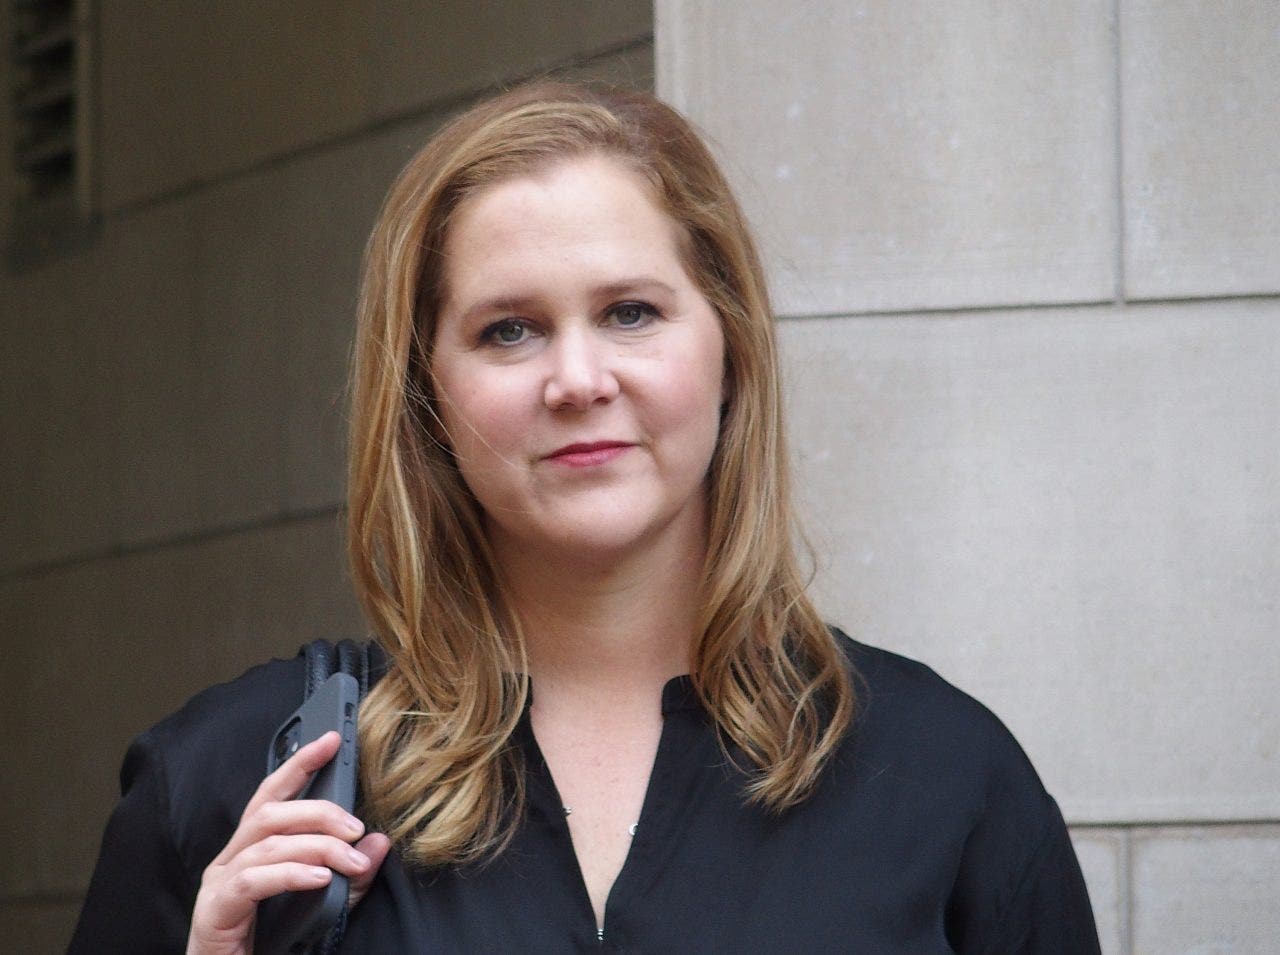 Amy Schumer reveals hair-pulling disorder: 'I think everybody has a big secret, and that’s mine'